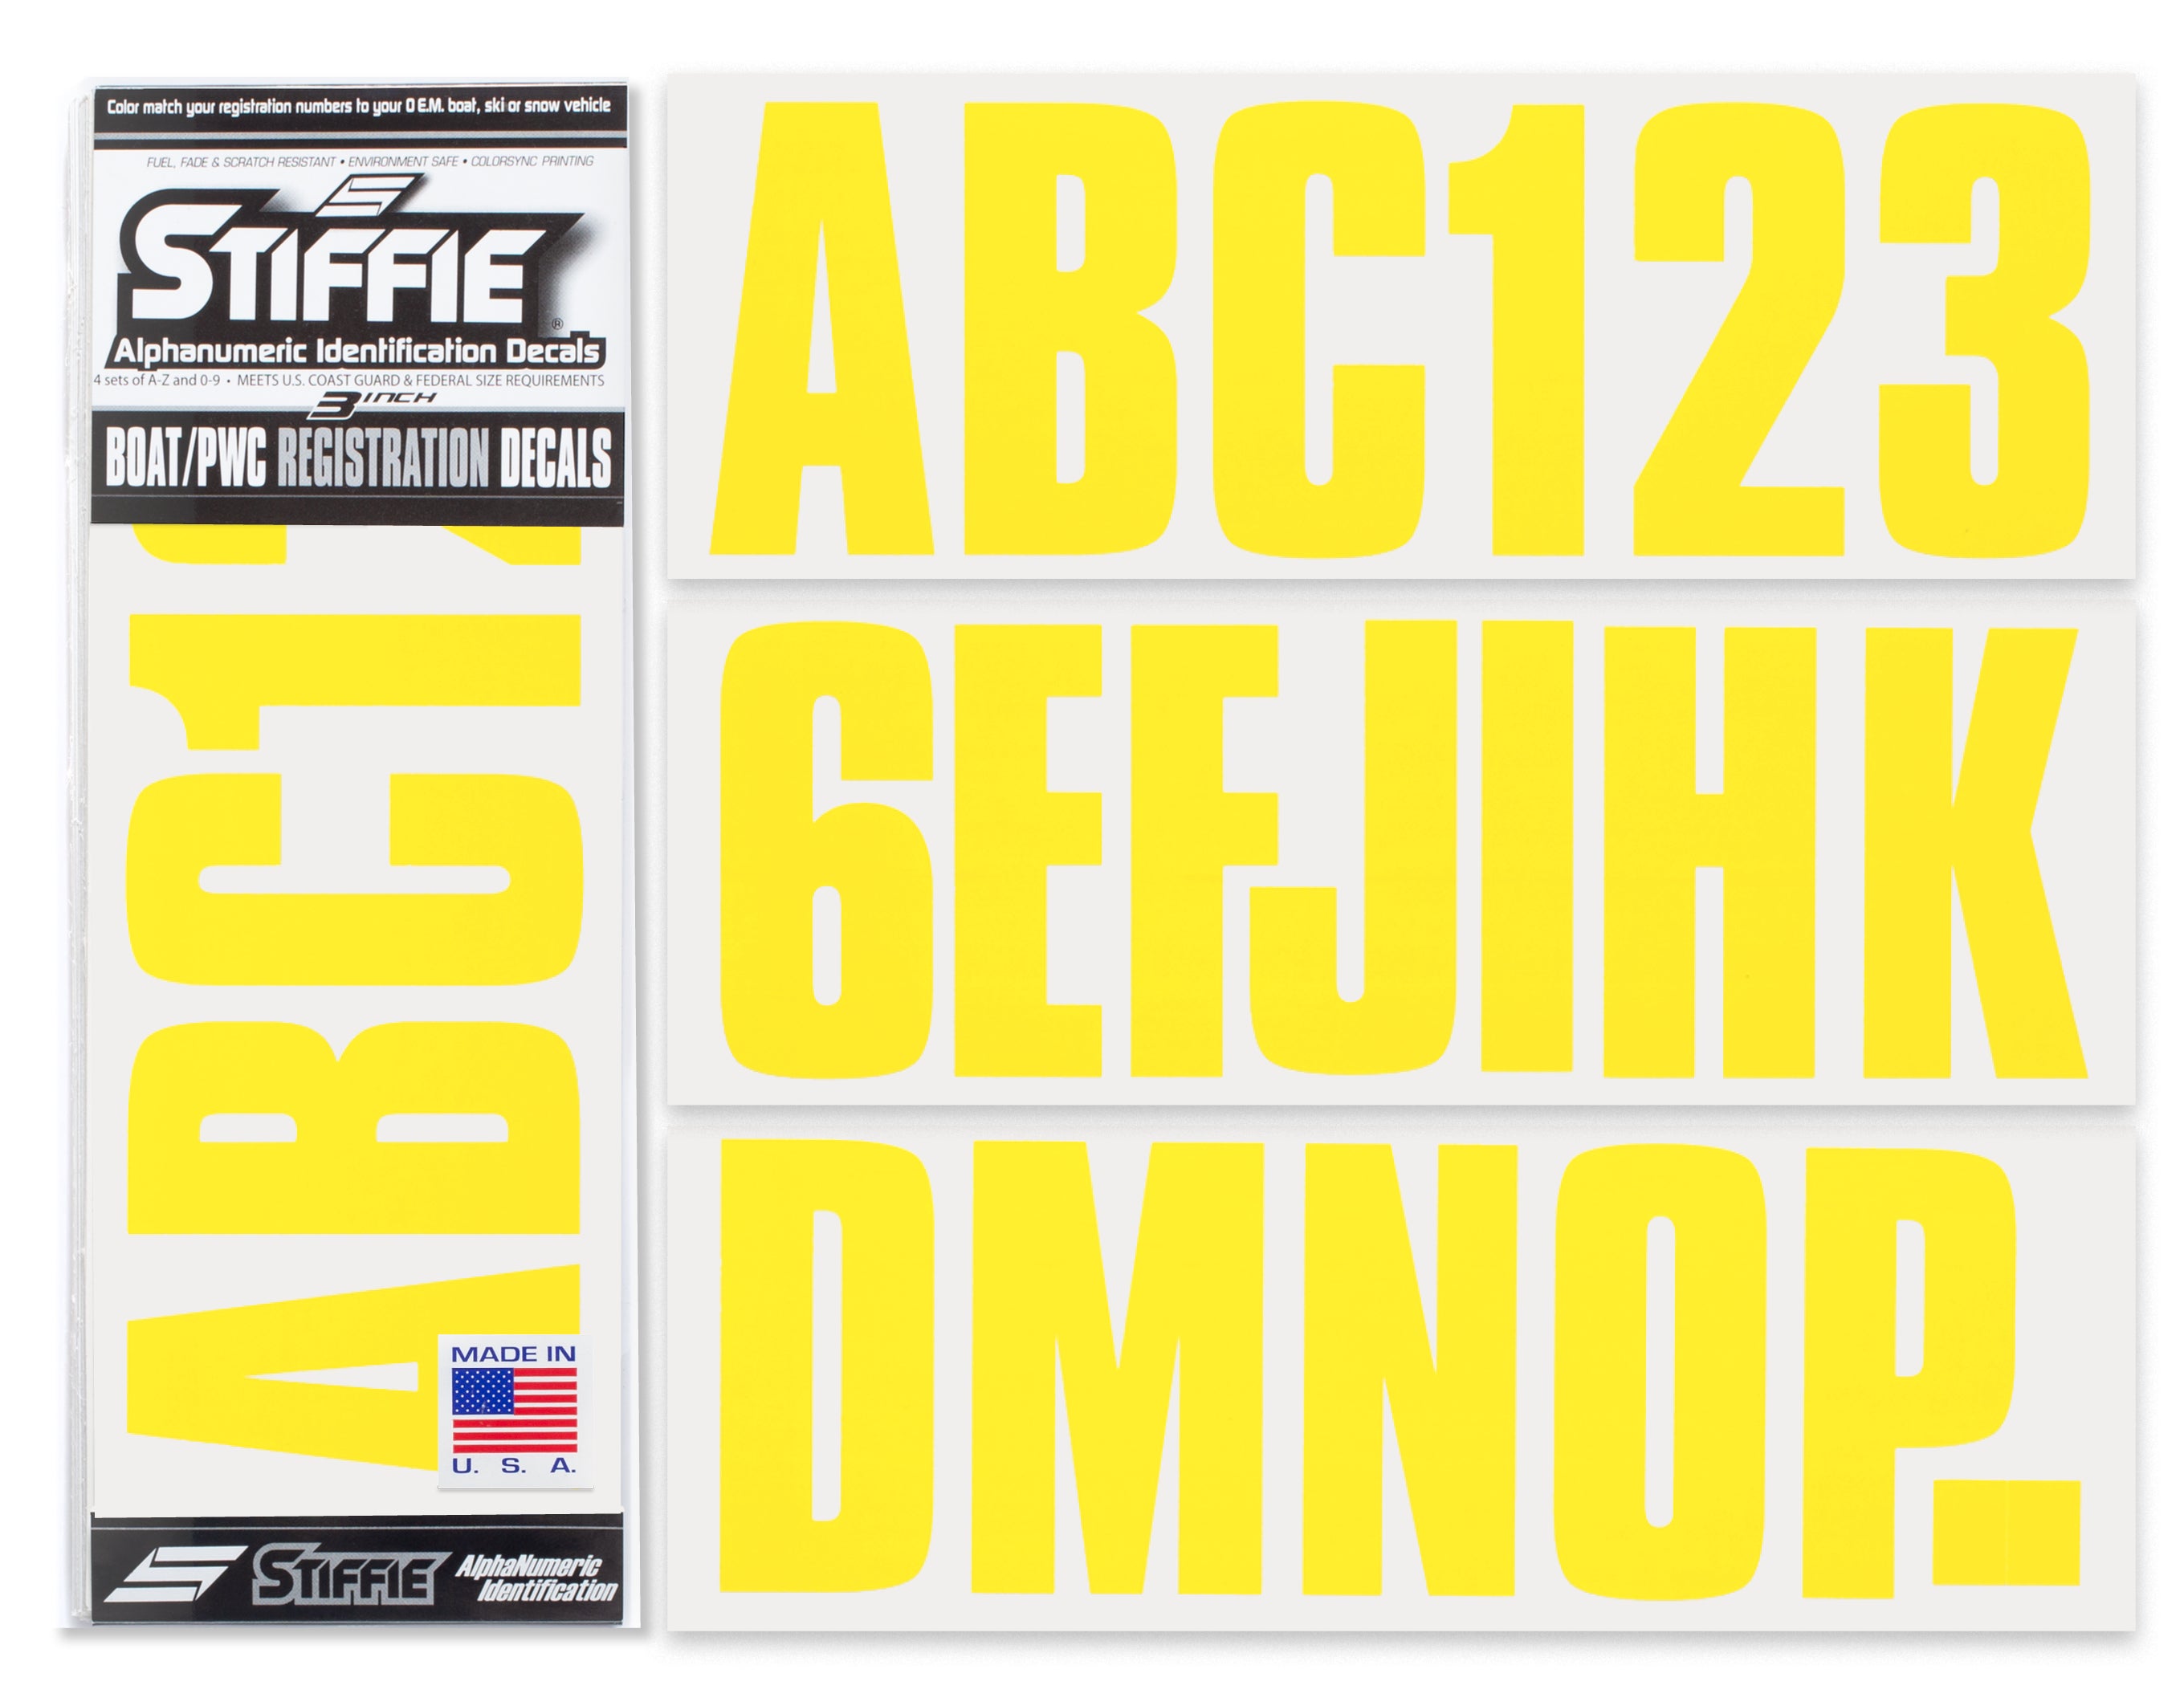 STIFFIE Uniline Electric Yellow 3" ID Kit Alpha-Numeric Registration Identification Numbers Stickers Decals for Boats & Personal Watercraft